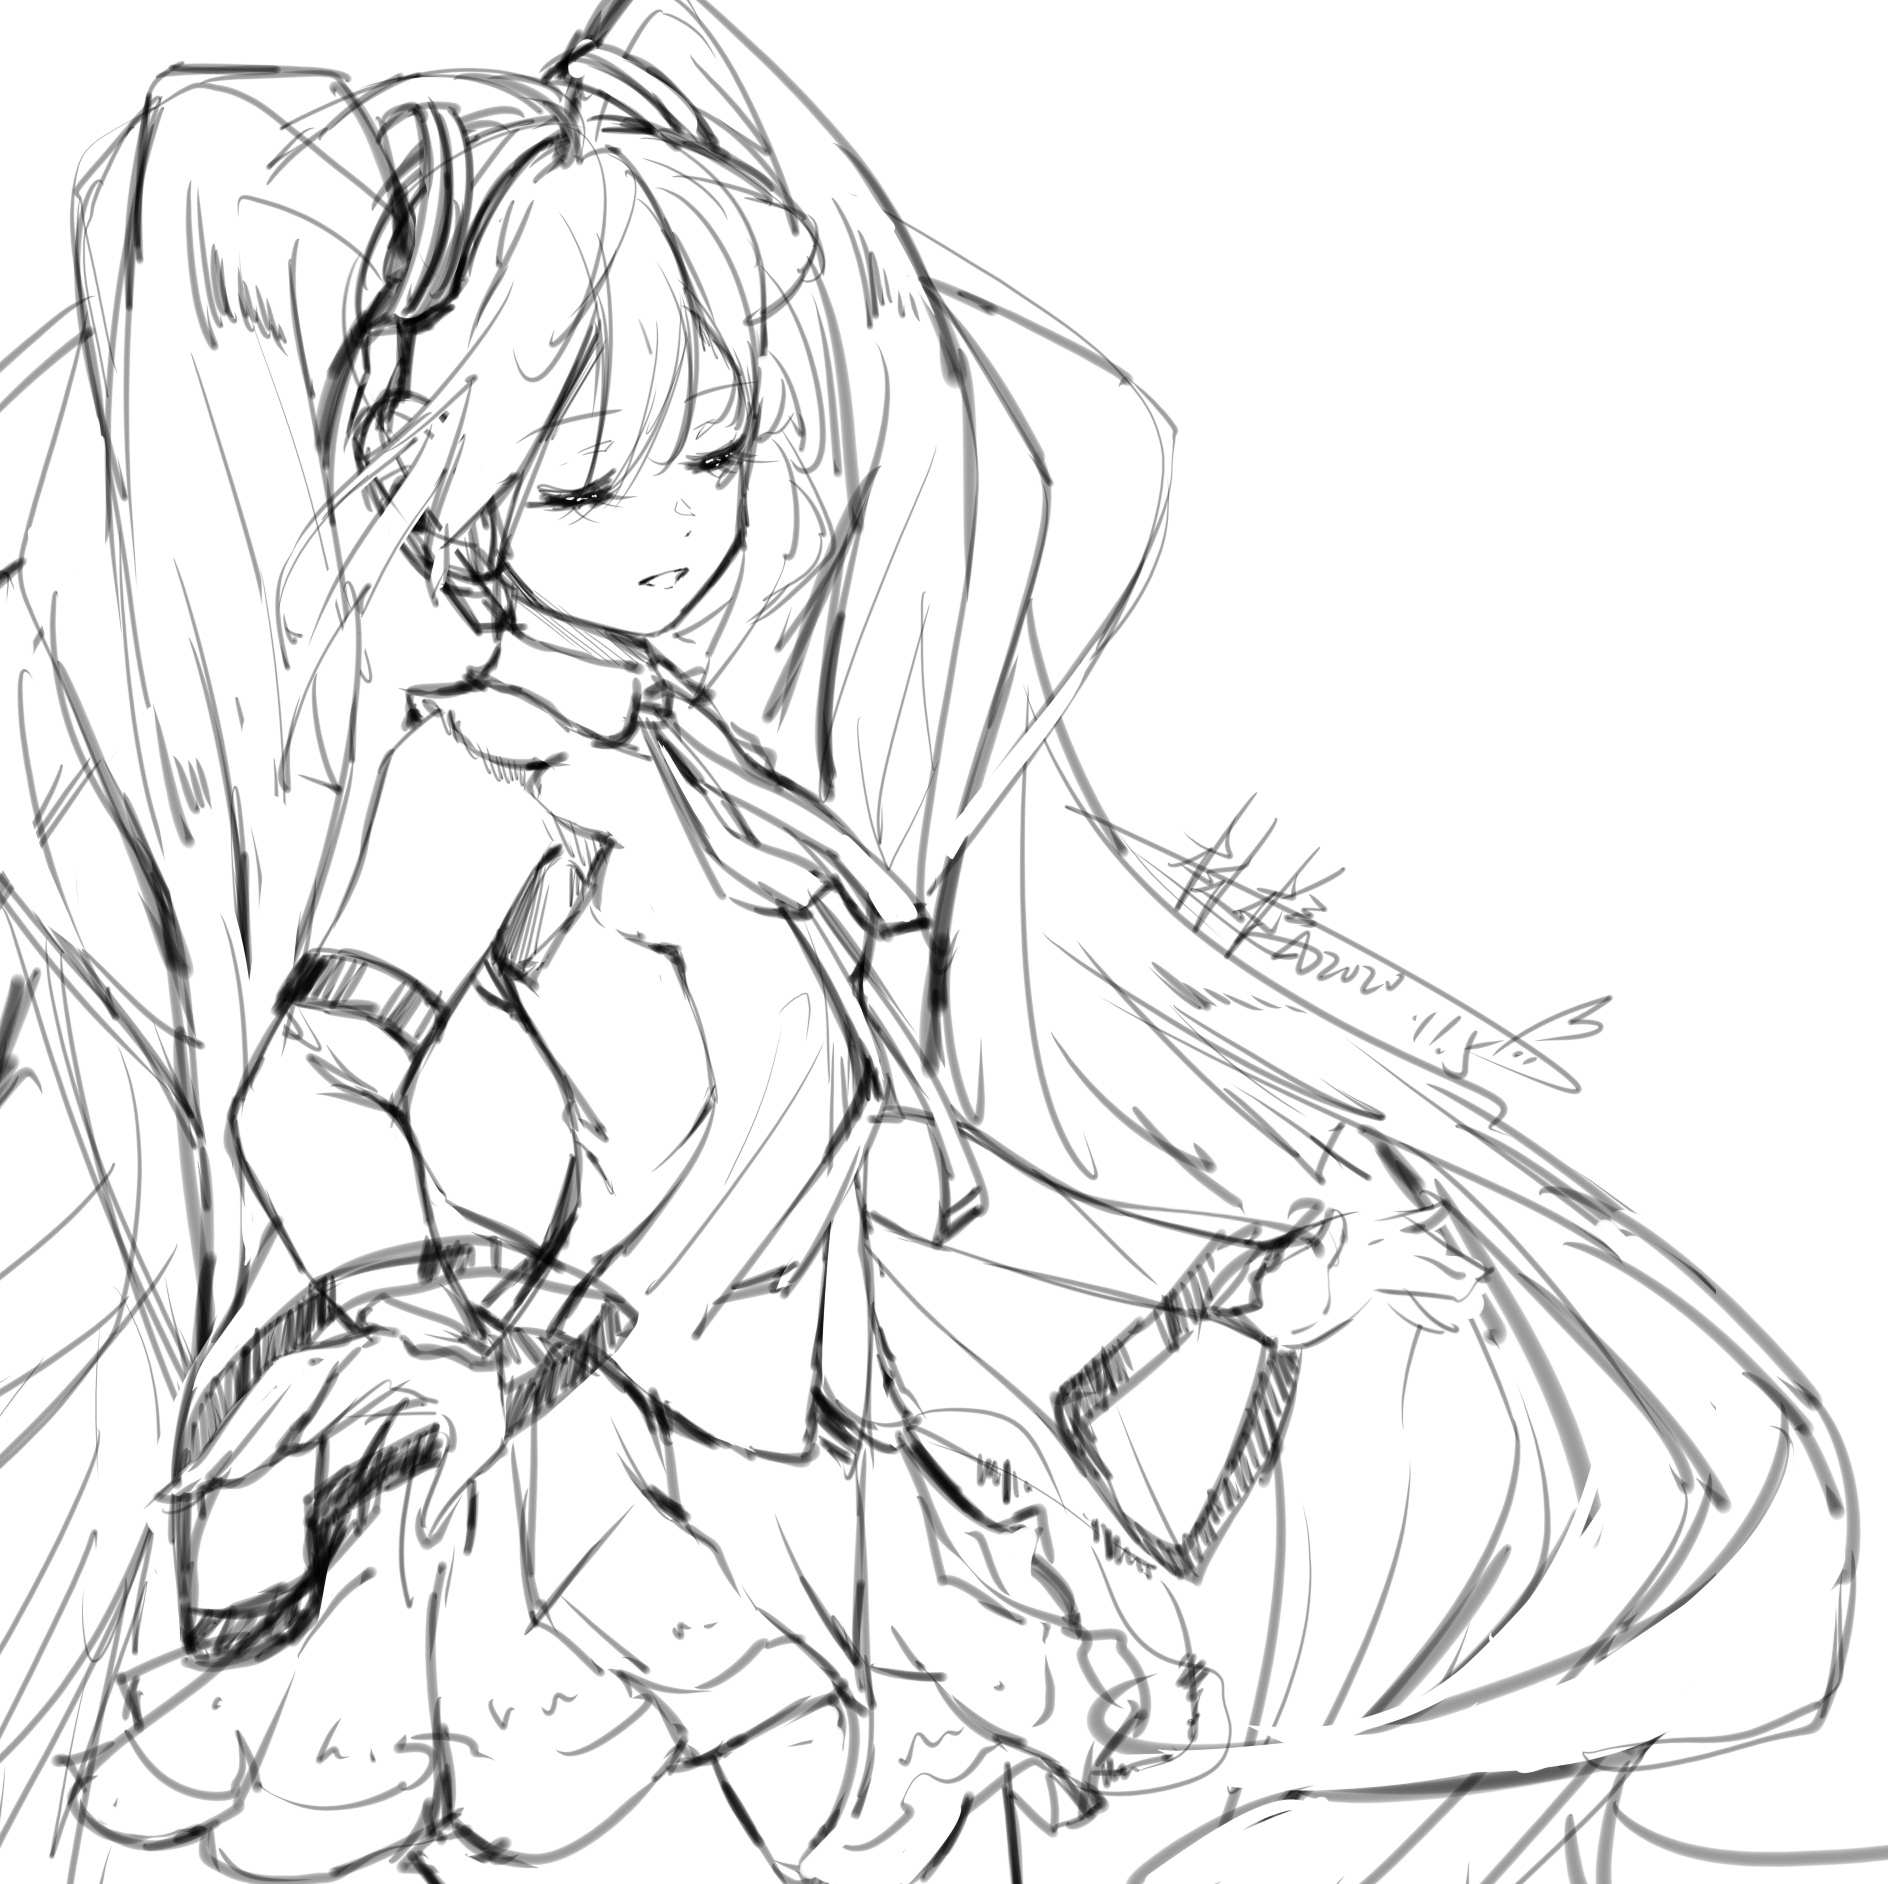 hatsune miku and hatsune miku vocaloid and 20 more drawn by ...